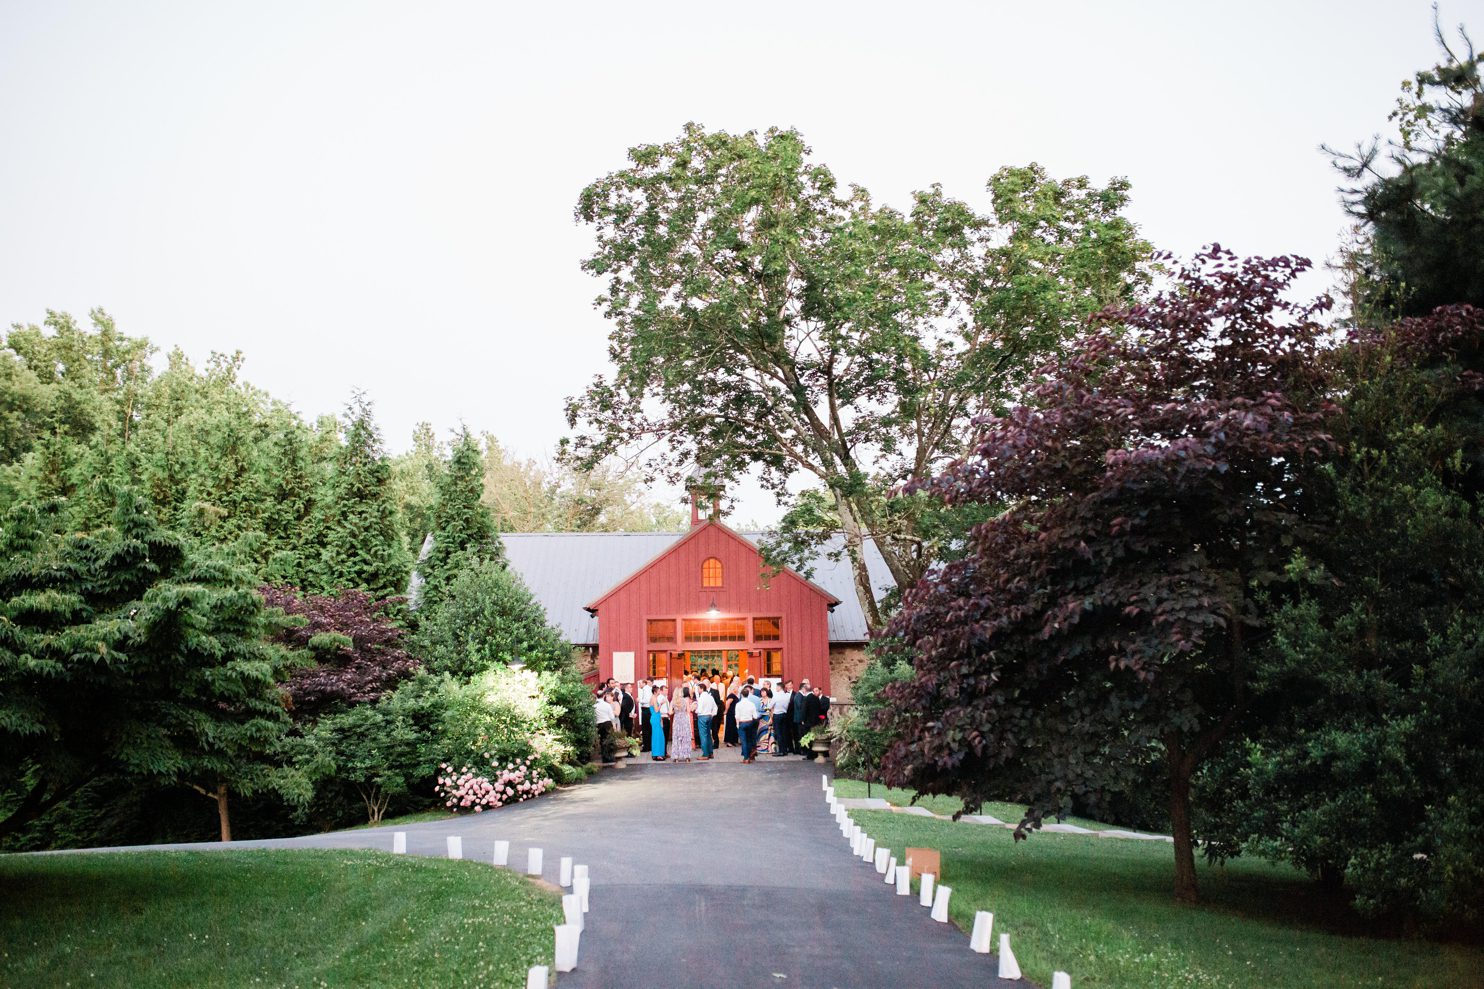 Inn-at-grace-winery-philadelphia-wedding-photos_0089 Ashley + Peter's Colorful Summer Wedding at the Inn at Grace Winery